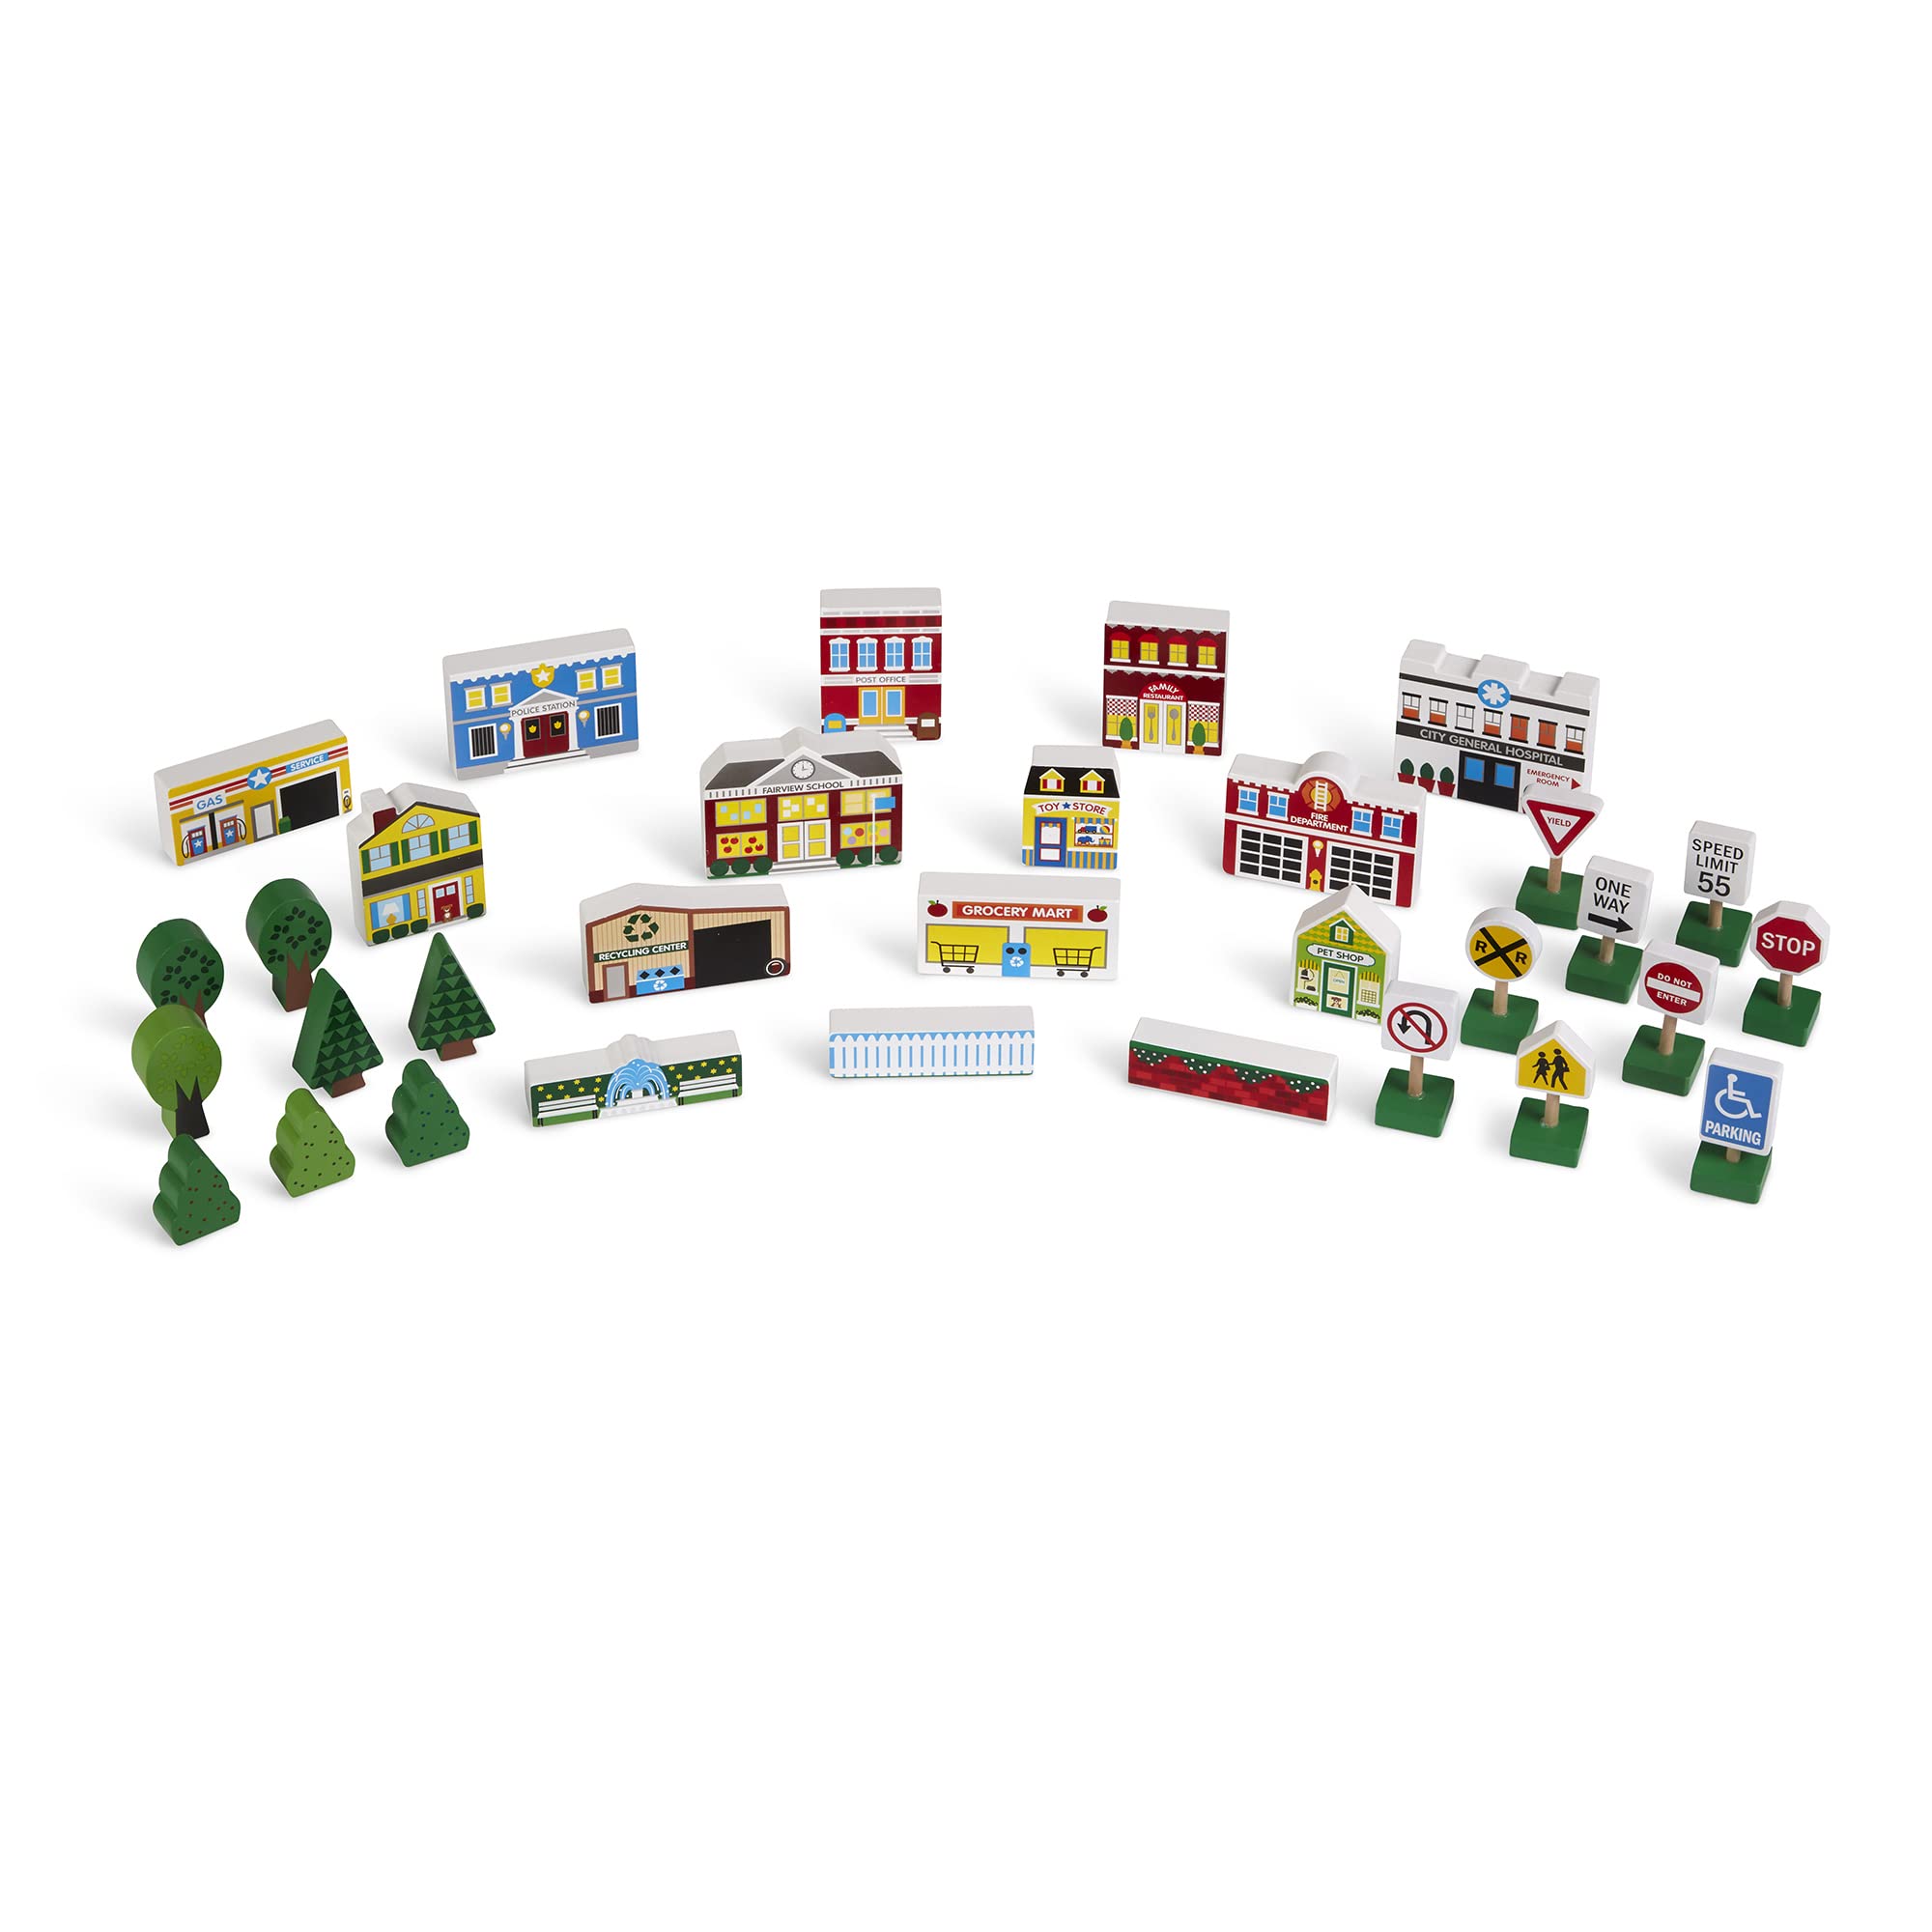 Melissa & Doug (FFP) - Pretend Play Wooden Town Play Set For Kids With Storage